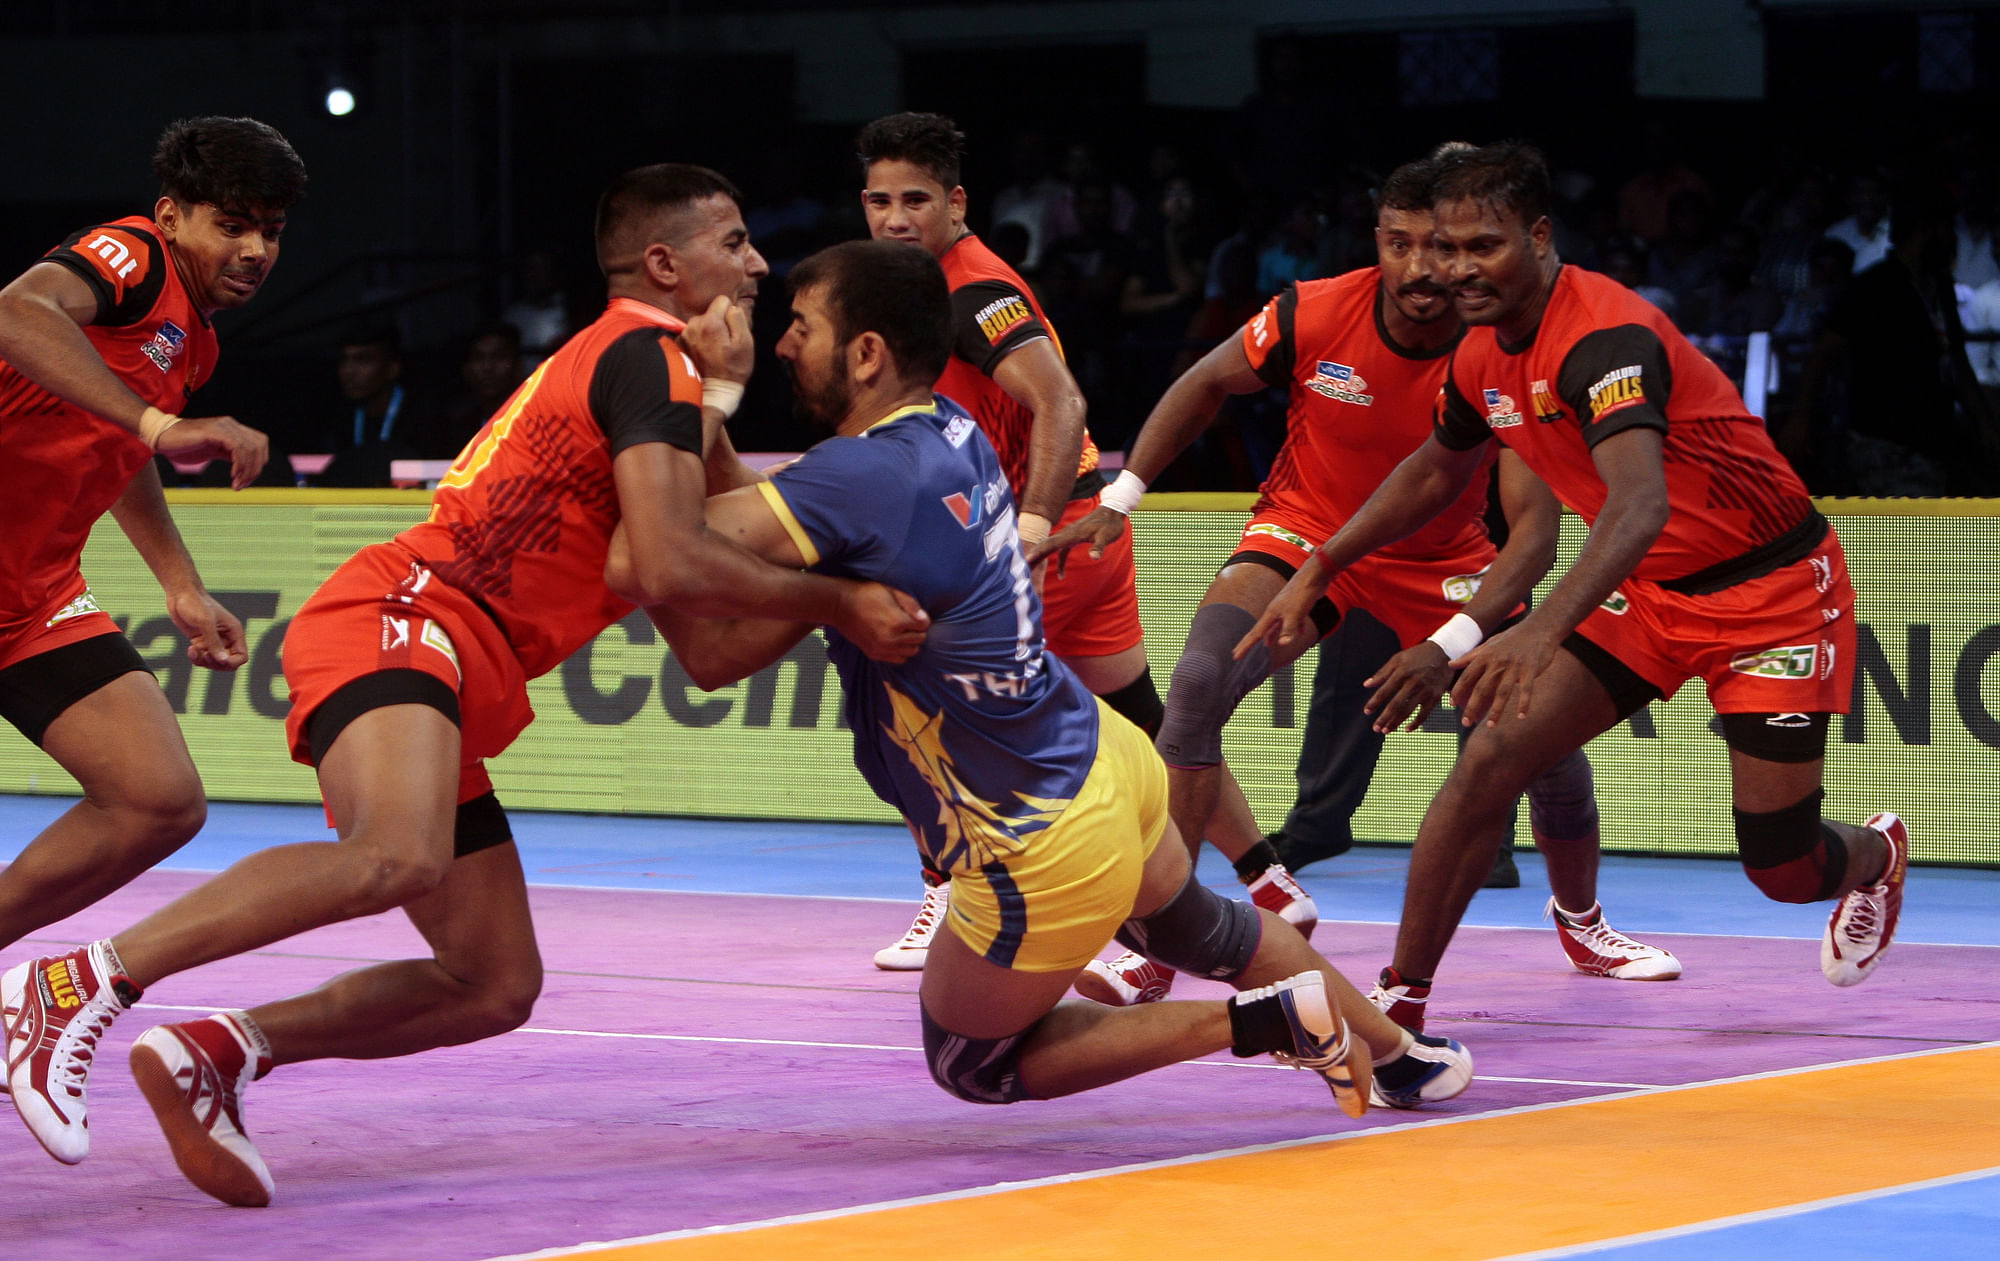 Tamil Thalaivas’ skipper Ajay Thakur (in blue) waged a lone battle against the Bulls and scored 20 points.